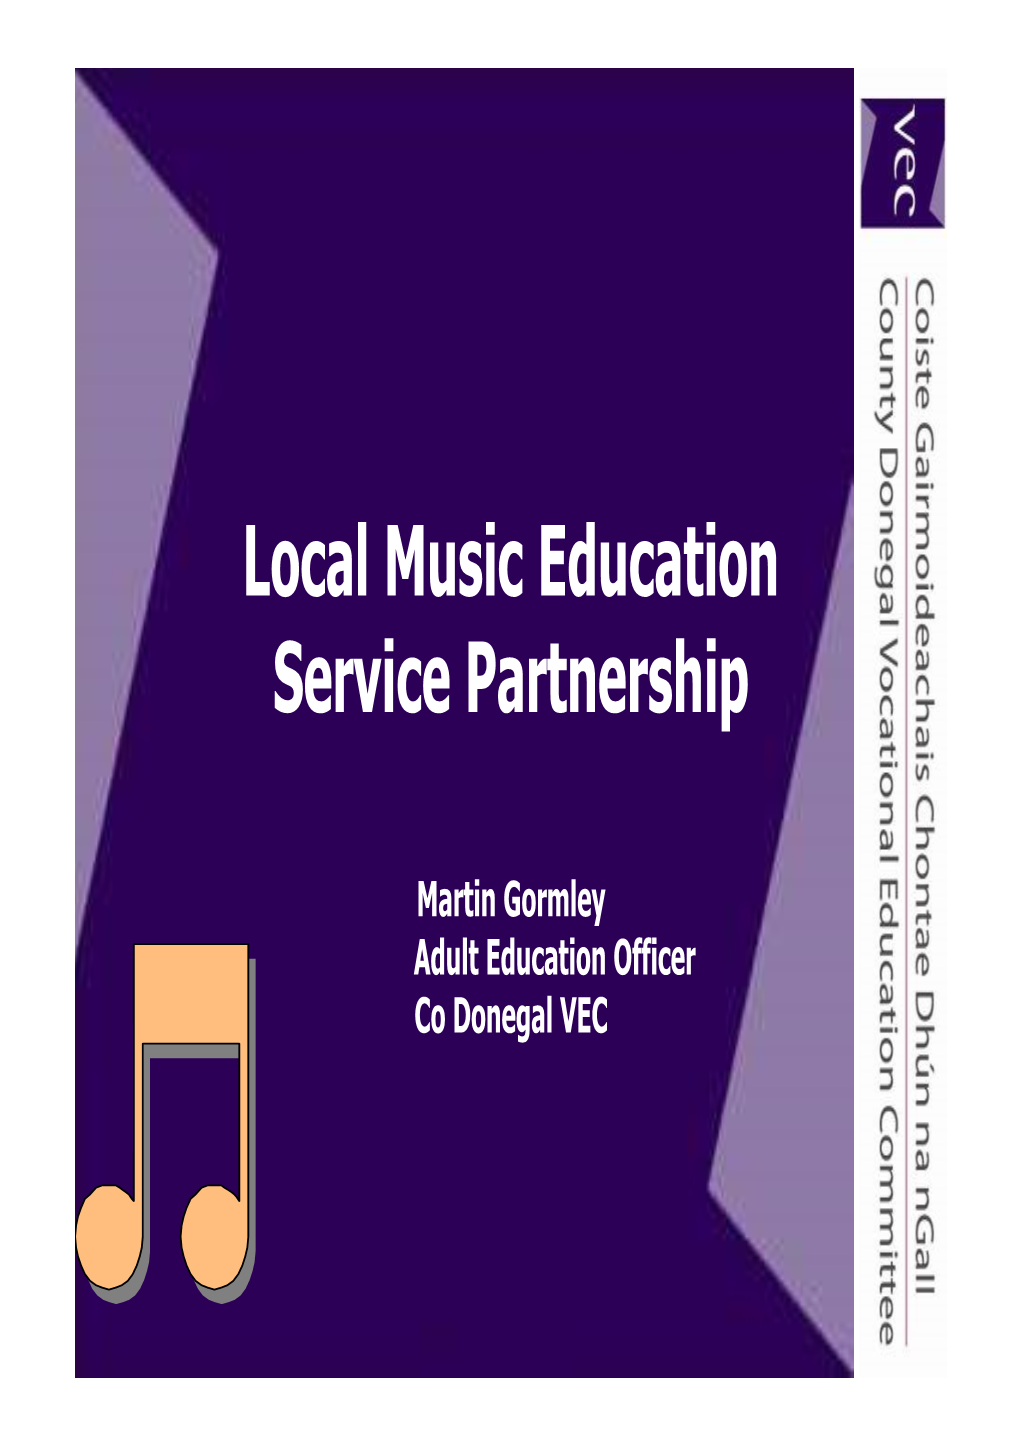 Co. Donegal VEC Local Music Education